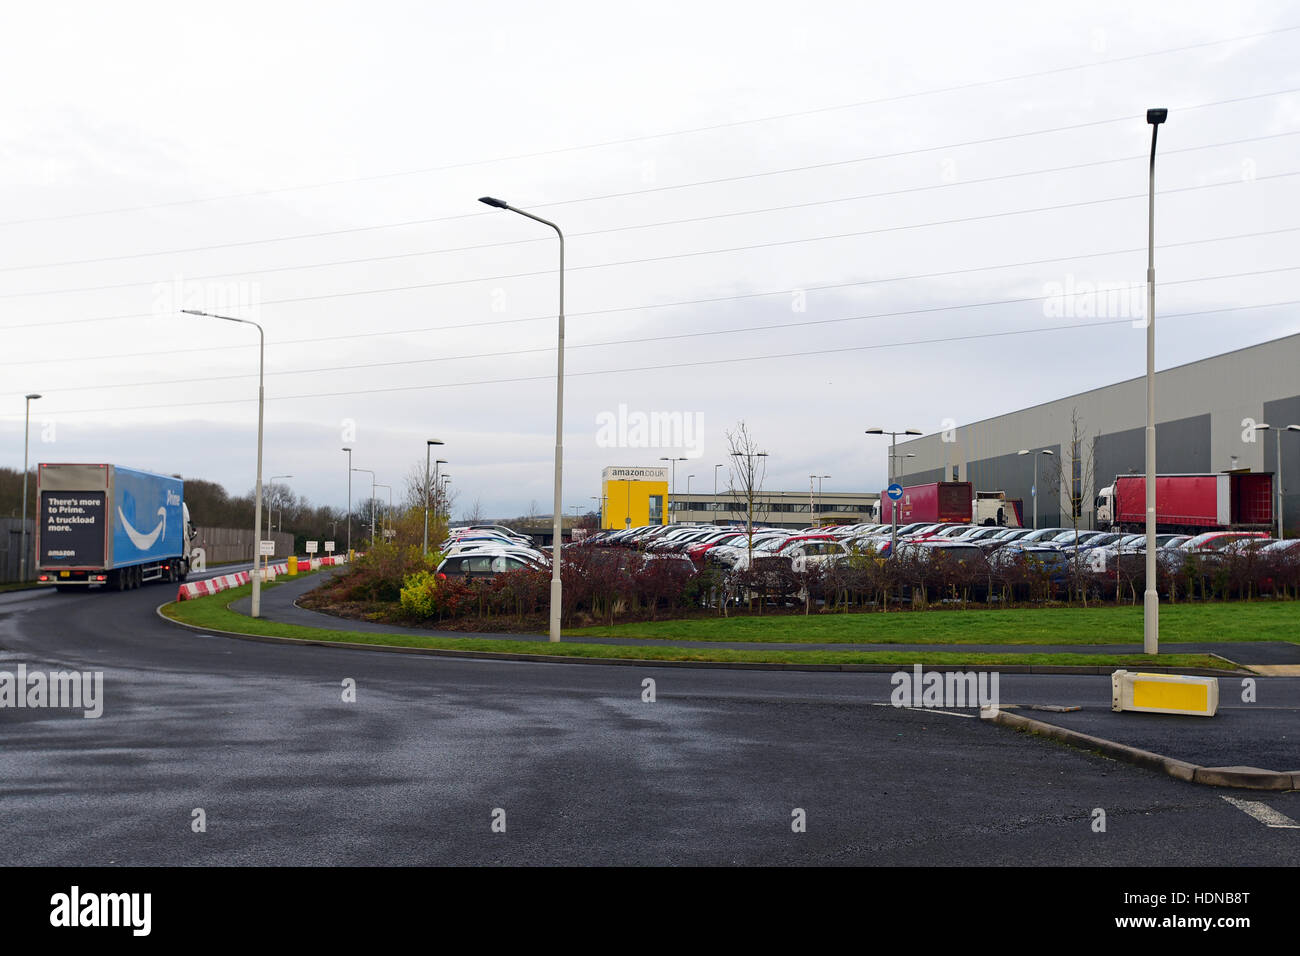 Dunfermline, Scotland, United Kingdom, 14, December, 2016. Retail giant Amazon's largest UK distribution centre in Dunfermline, Fife, which is facing criticism about working conditions following an undercover newspaper report, Credit:  Ken Jack / Alamy Live News Stock Photo